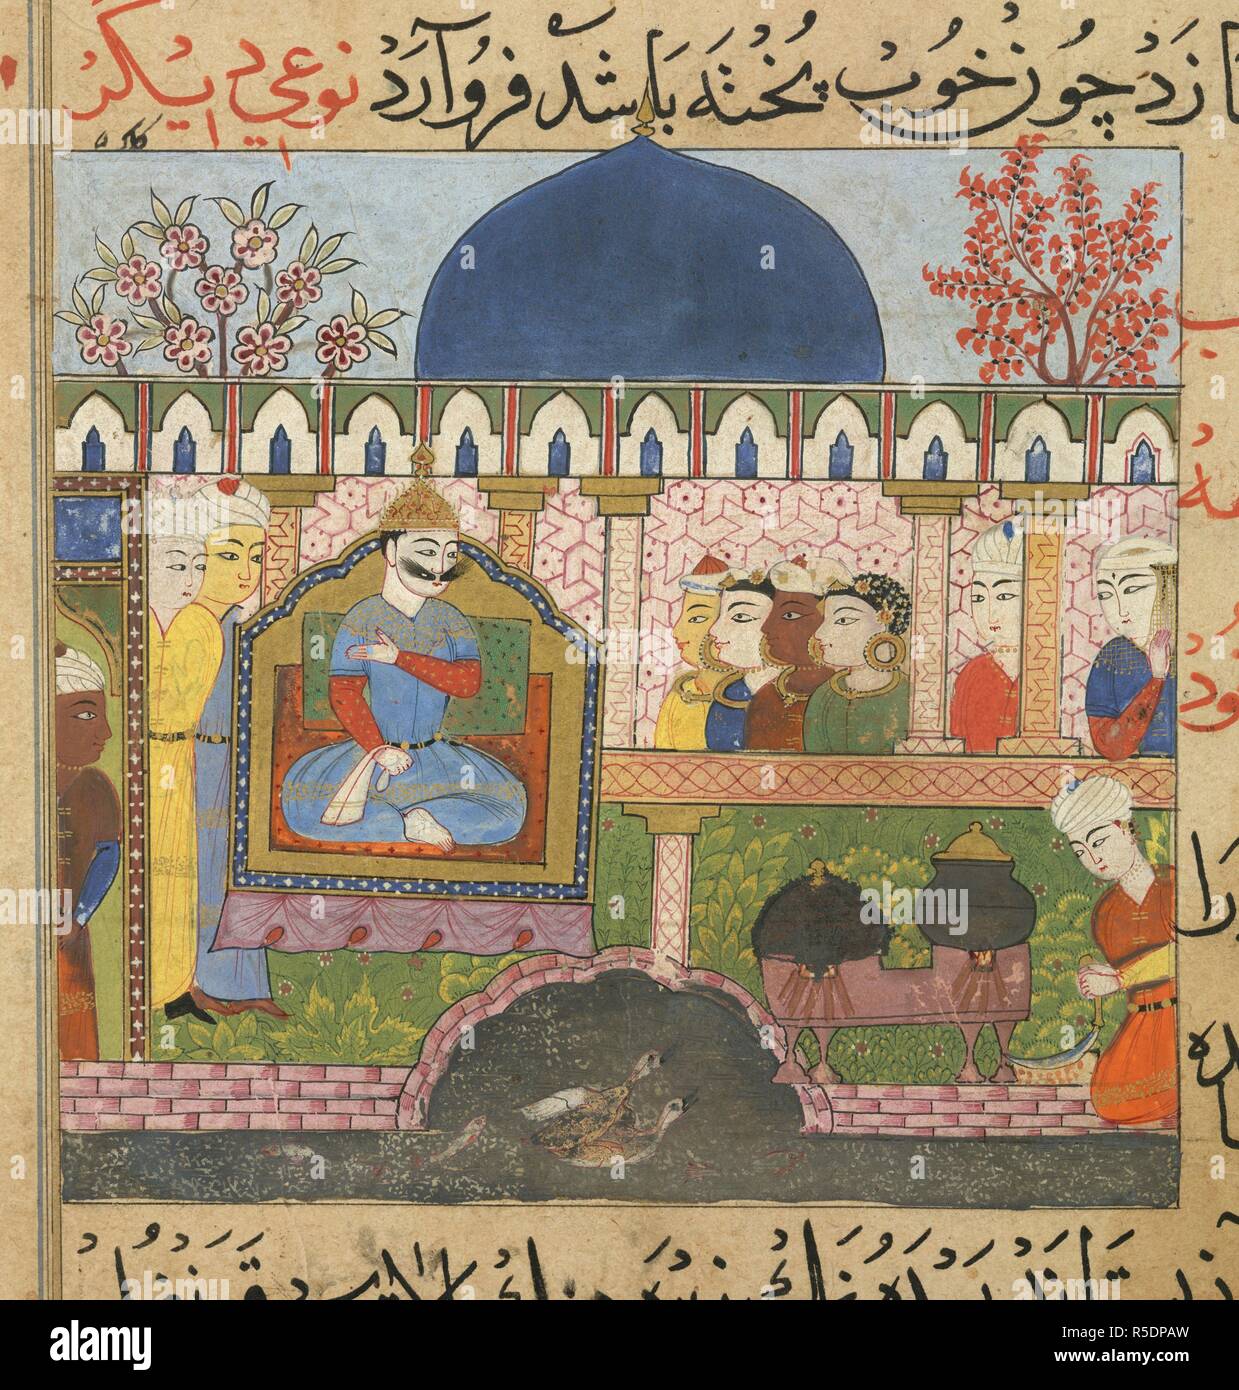 Rice water being prepared. The Ni'matnama-i Nasir al-Din Shah. A manuscript o. 1495 - 1505. Rice water (conjee) being prepared for the Sultan Ghiyath al-Din. Opaque watercolour. Sultanate style.  Image taken from The Ni'matnama-i Nasir al-Din Shah. A manuscript on Indian cookery and the preparation of sweetmeats, spices etc.  Originally published/produced in 1495 - 1505. . Source: I.O. ISLAMIC 149, f.32. Language: Persian. Stock Photo